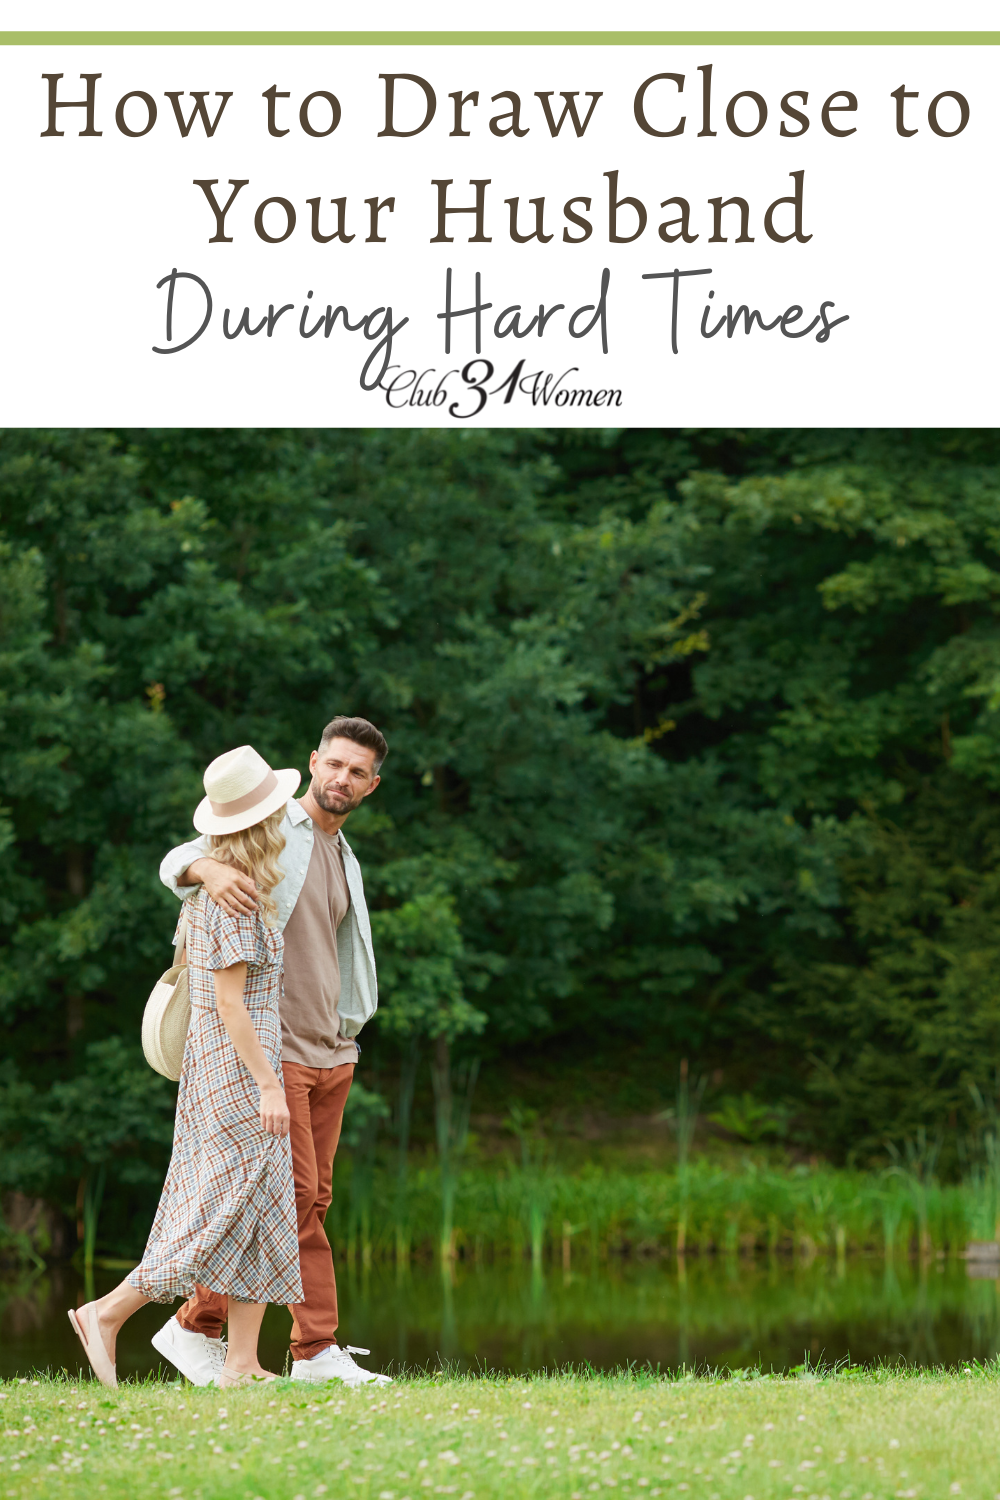 When your marriage faces hard times, withdrawing is not the answer. Instead, draw close to your husband so your marriage will strengthen when under stress. via @Club31Women